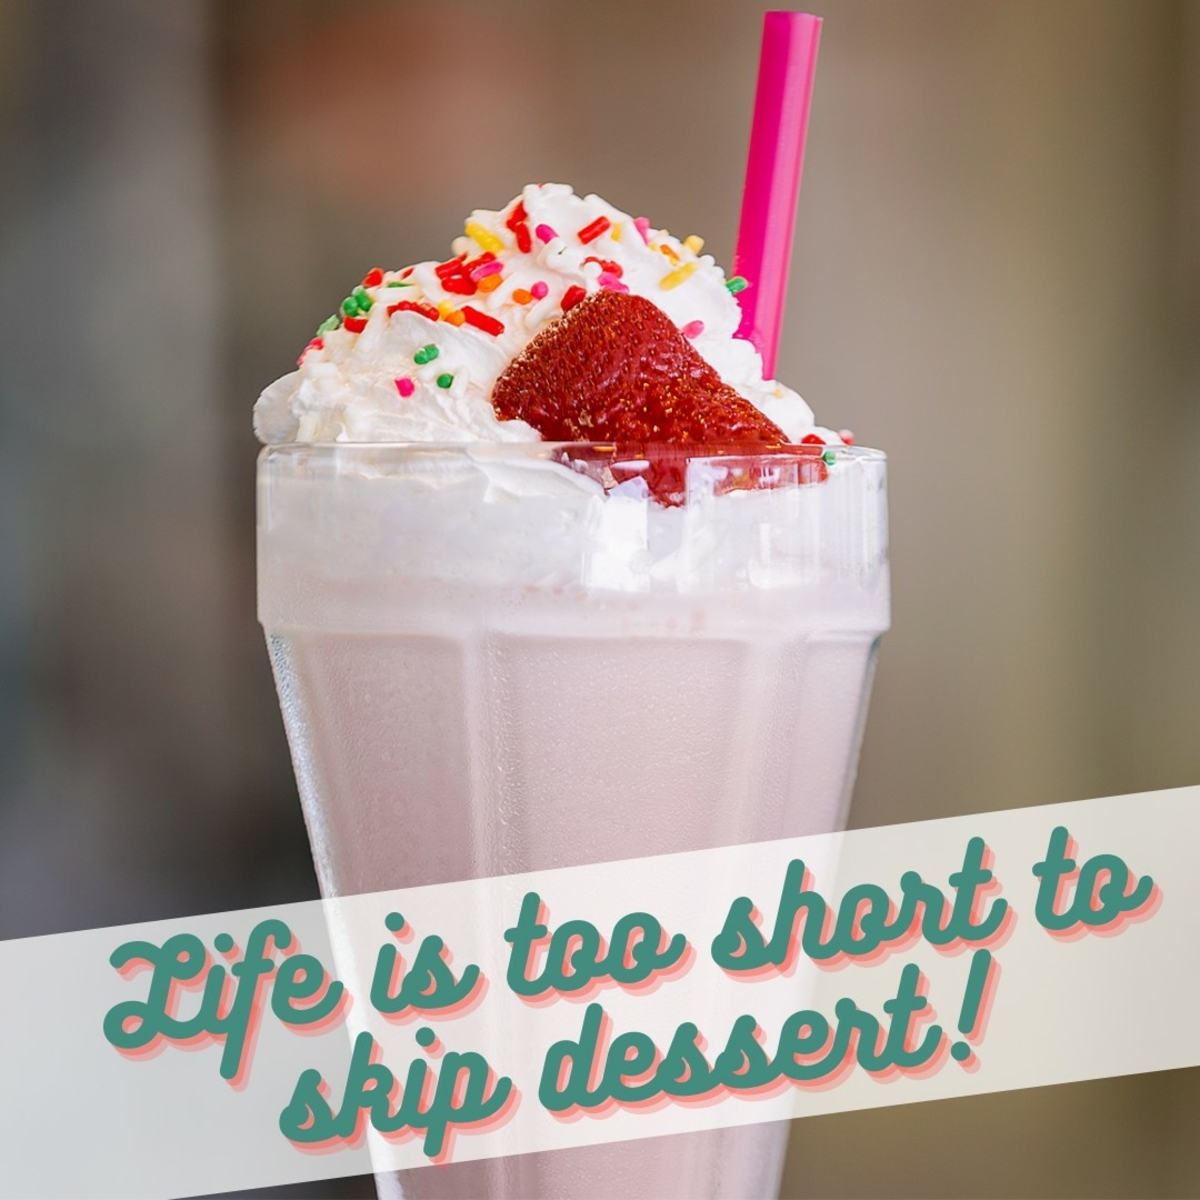 You certainly won't regret ordering one of our famous hand-spun milkshakes the next time you're at Penny's Diner Glenwood! Come get yours today 😄 #dessert #yum #MNfoodie #milkshake #diner #handspun #goodeats